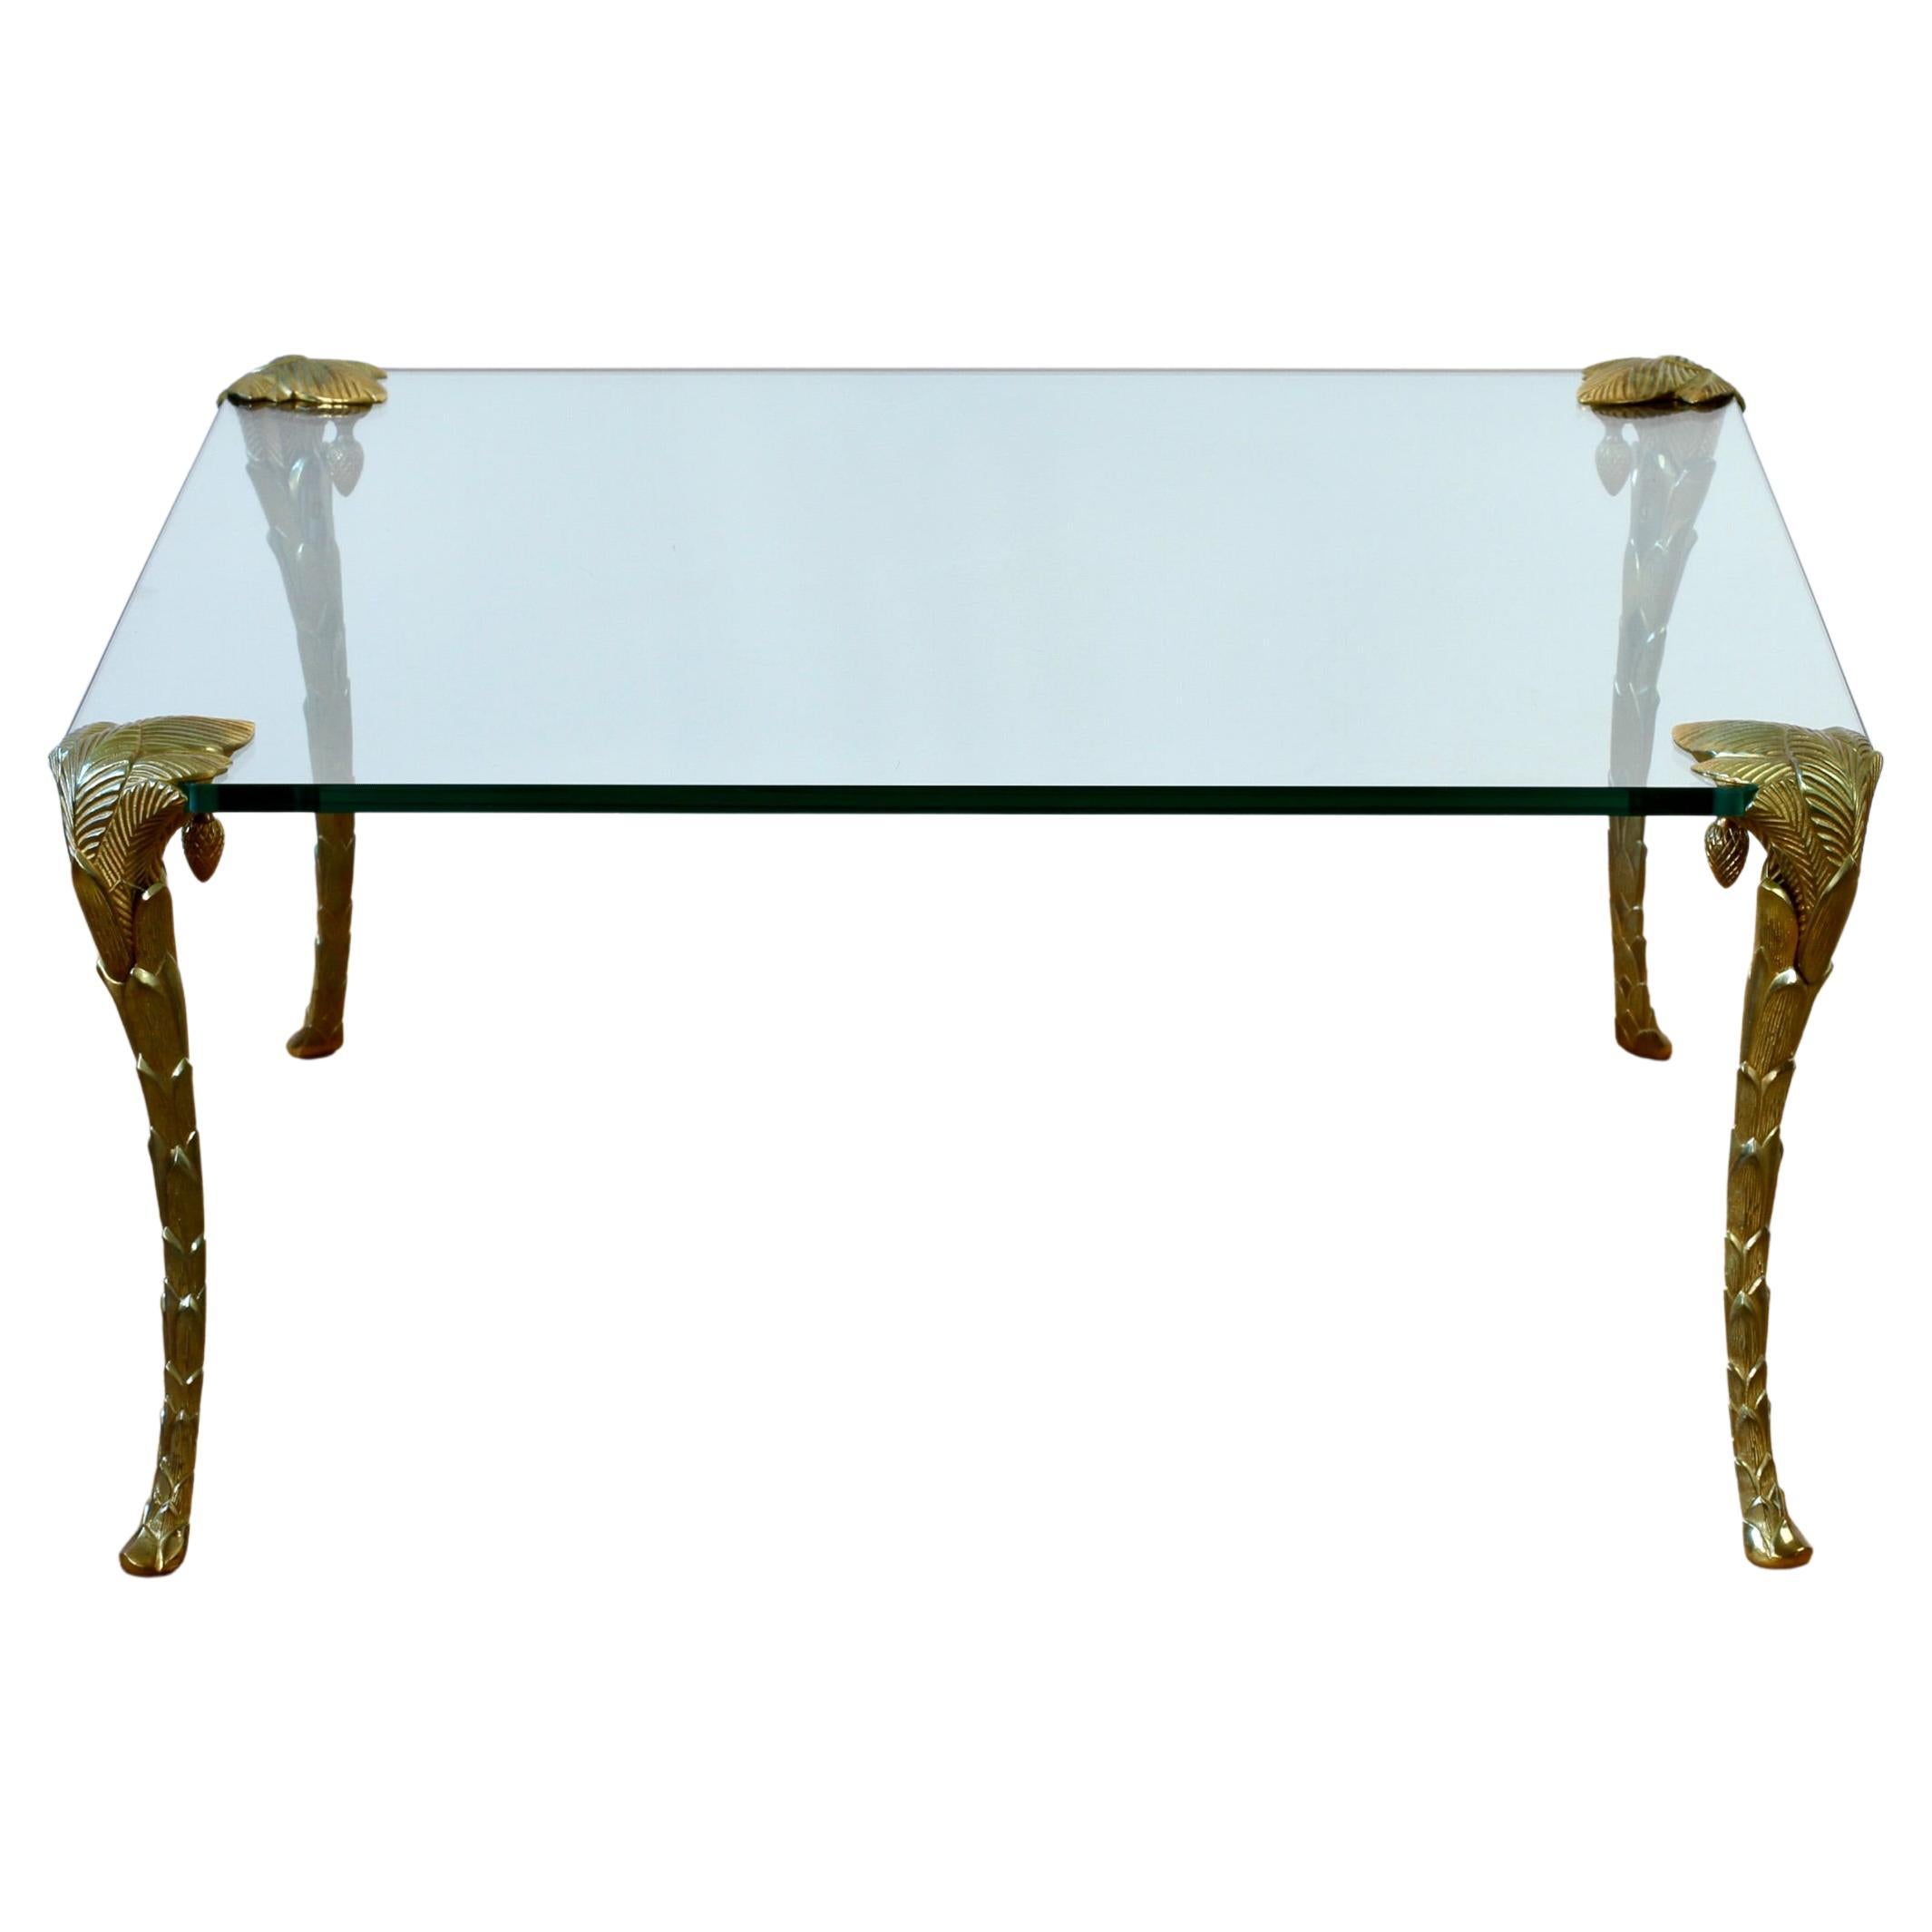 Maison Charles Extremely Rare Gold Plated Bronze Palm Leaf Coffee Center Table